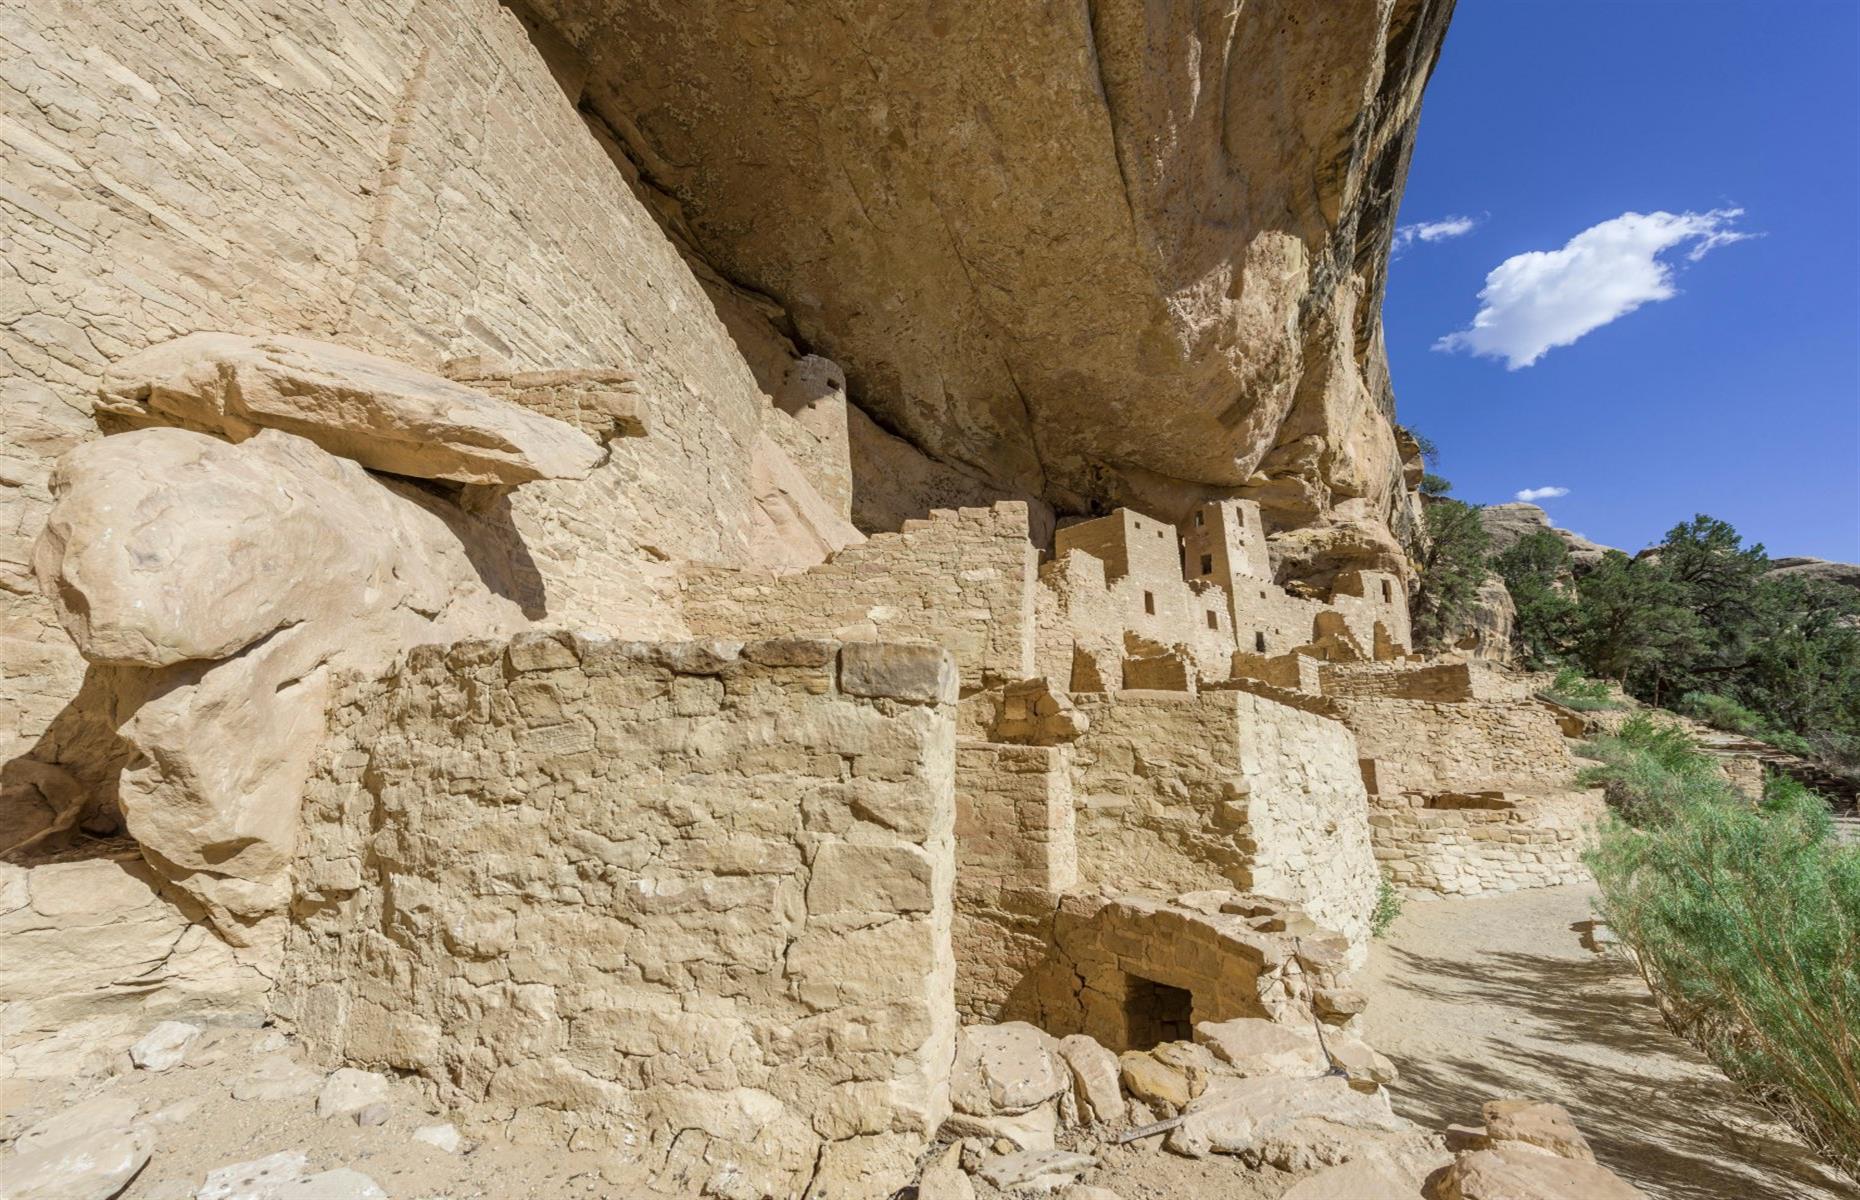 <p>It was two cowboys, Charlie Mason and his brother-in-law, Richard Wetherill, who made history in 1888. While searching for stray cattle in southwestern Colorado, they stumbled across the largest concentration of cliff dwellings ever found, built by the ancestors of the Pueblo Indians that lived nearby. Wetherill named it the Cliff Palace. </p>